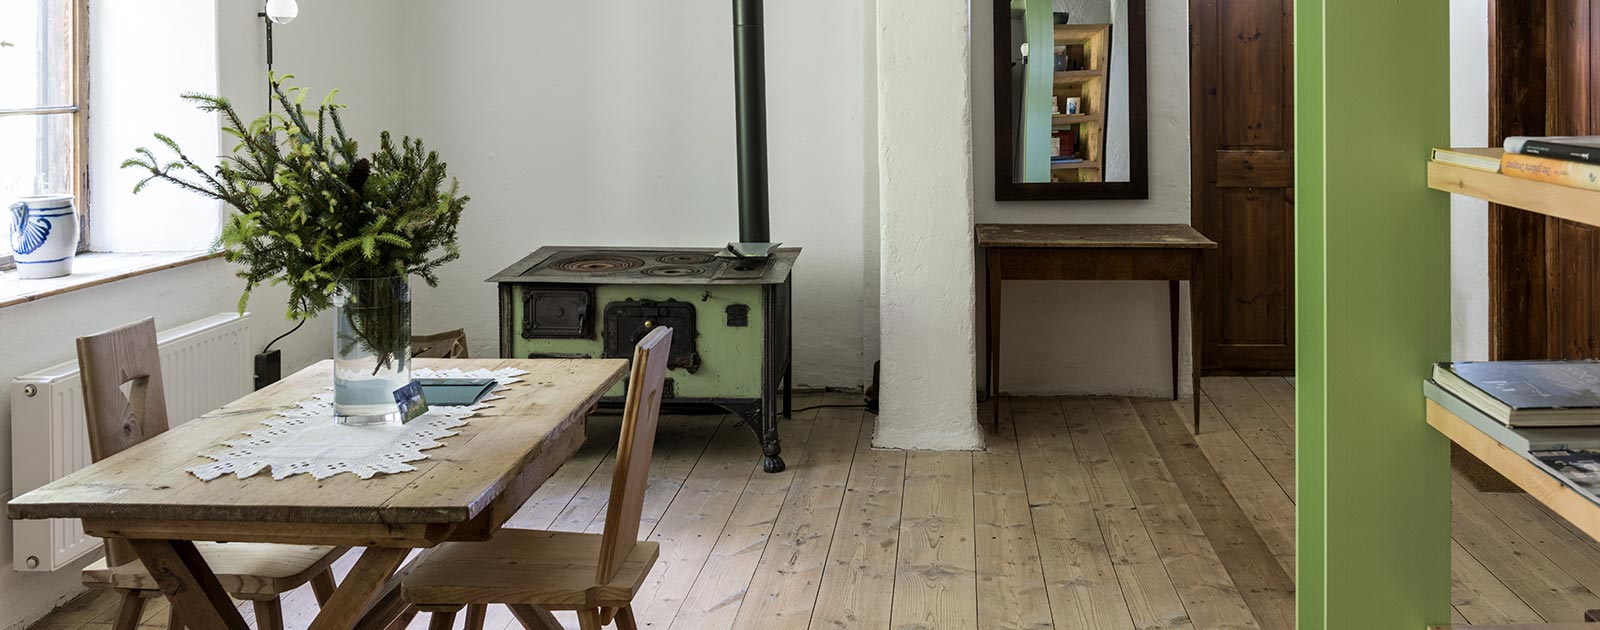 the dining table and an antique wood-burning oven in a room of the Settari house of the Briol hotel in Barbiano